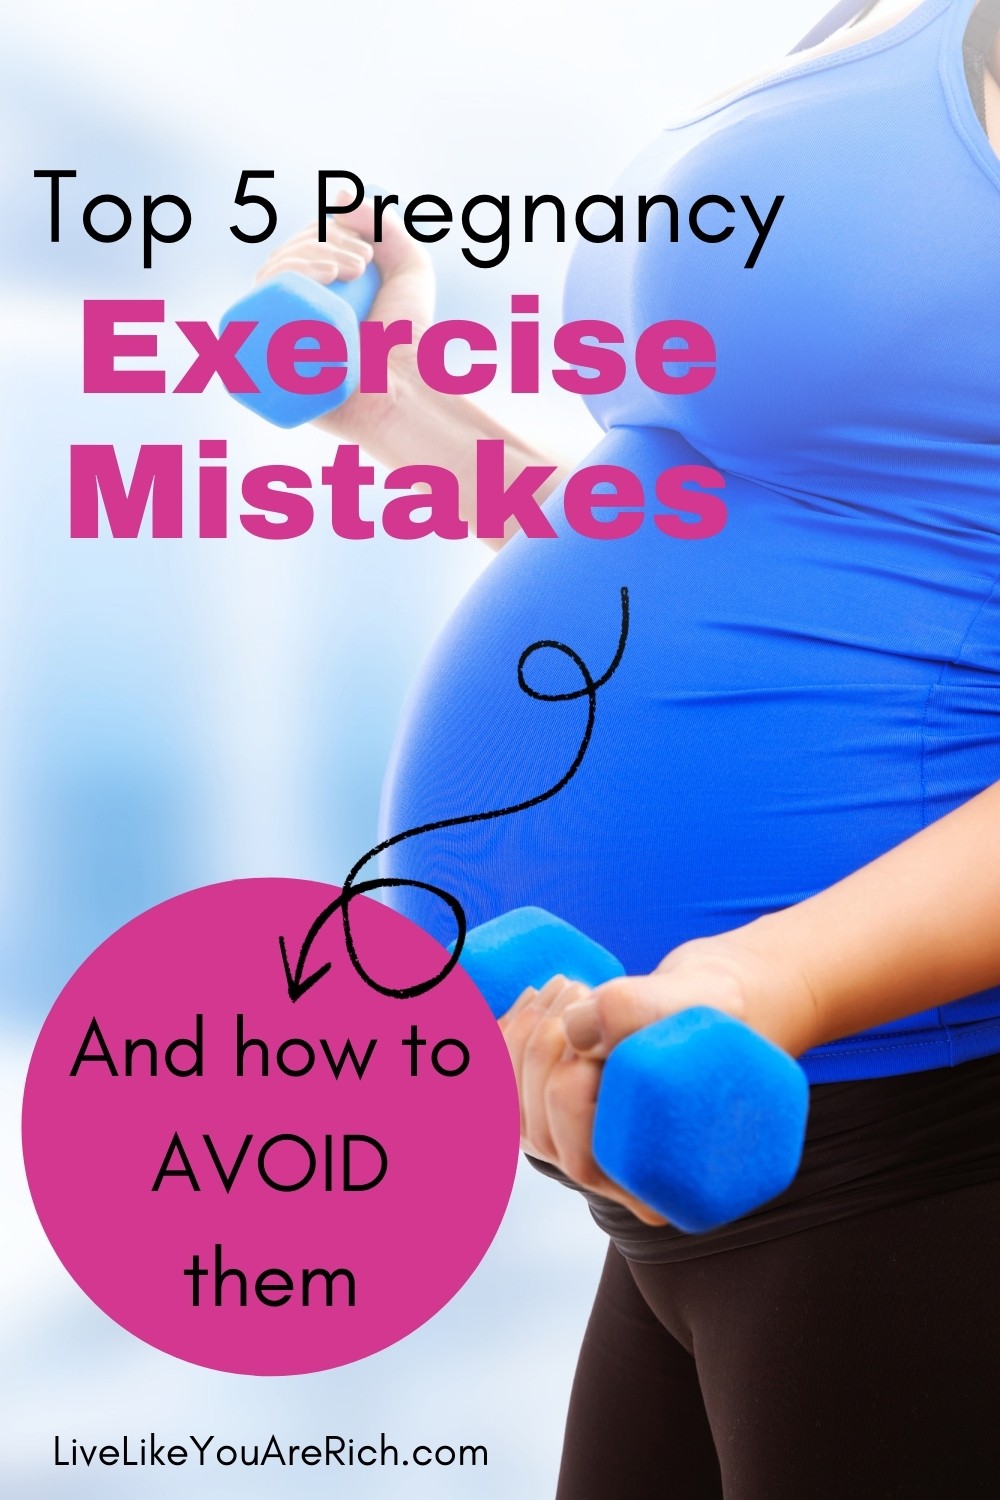 It’s amazing how being pregnant changes almost every aspect of your life—almost immediately. While you incorporate exercise as a part of your daily routine to enjoy a healthy pregnancy, if careless, you could be causing yourself (and your baby) more harm than good. Here are the top five pregnancy exercise mistakes and ways to avoid them. #pregnancy #pregnancytips #healthandfitness